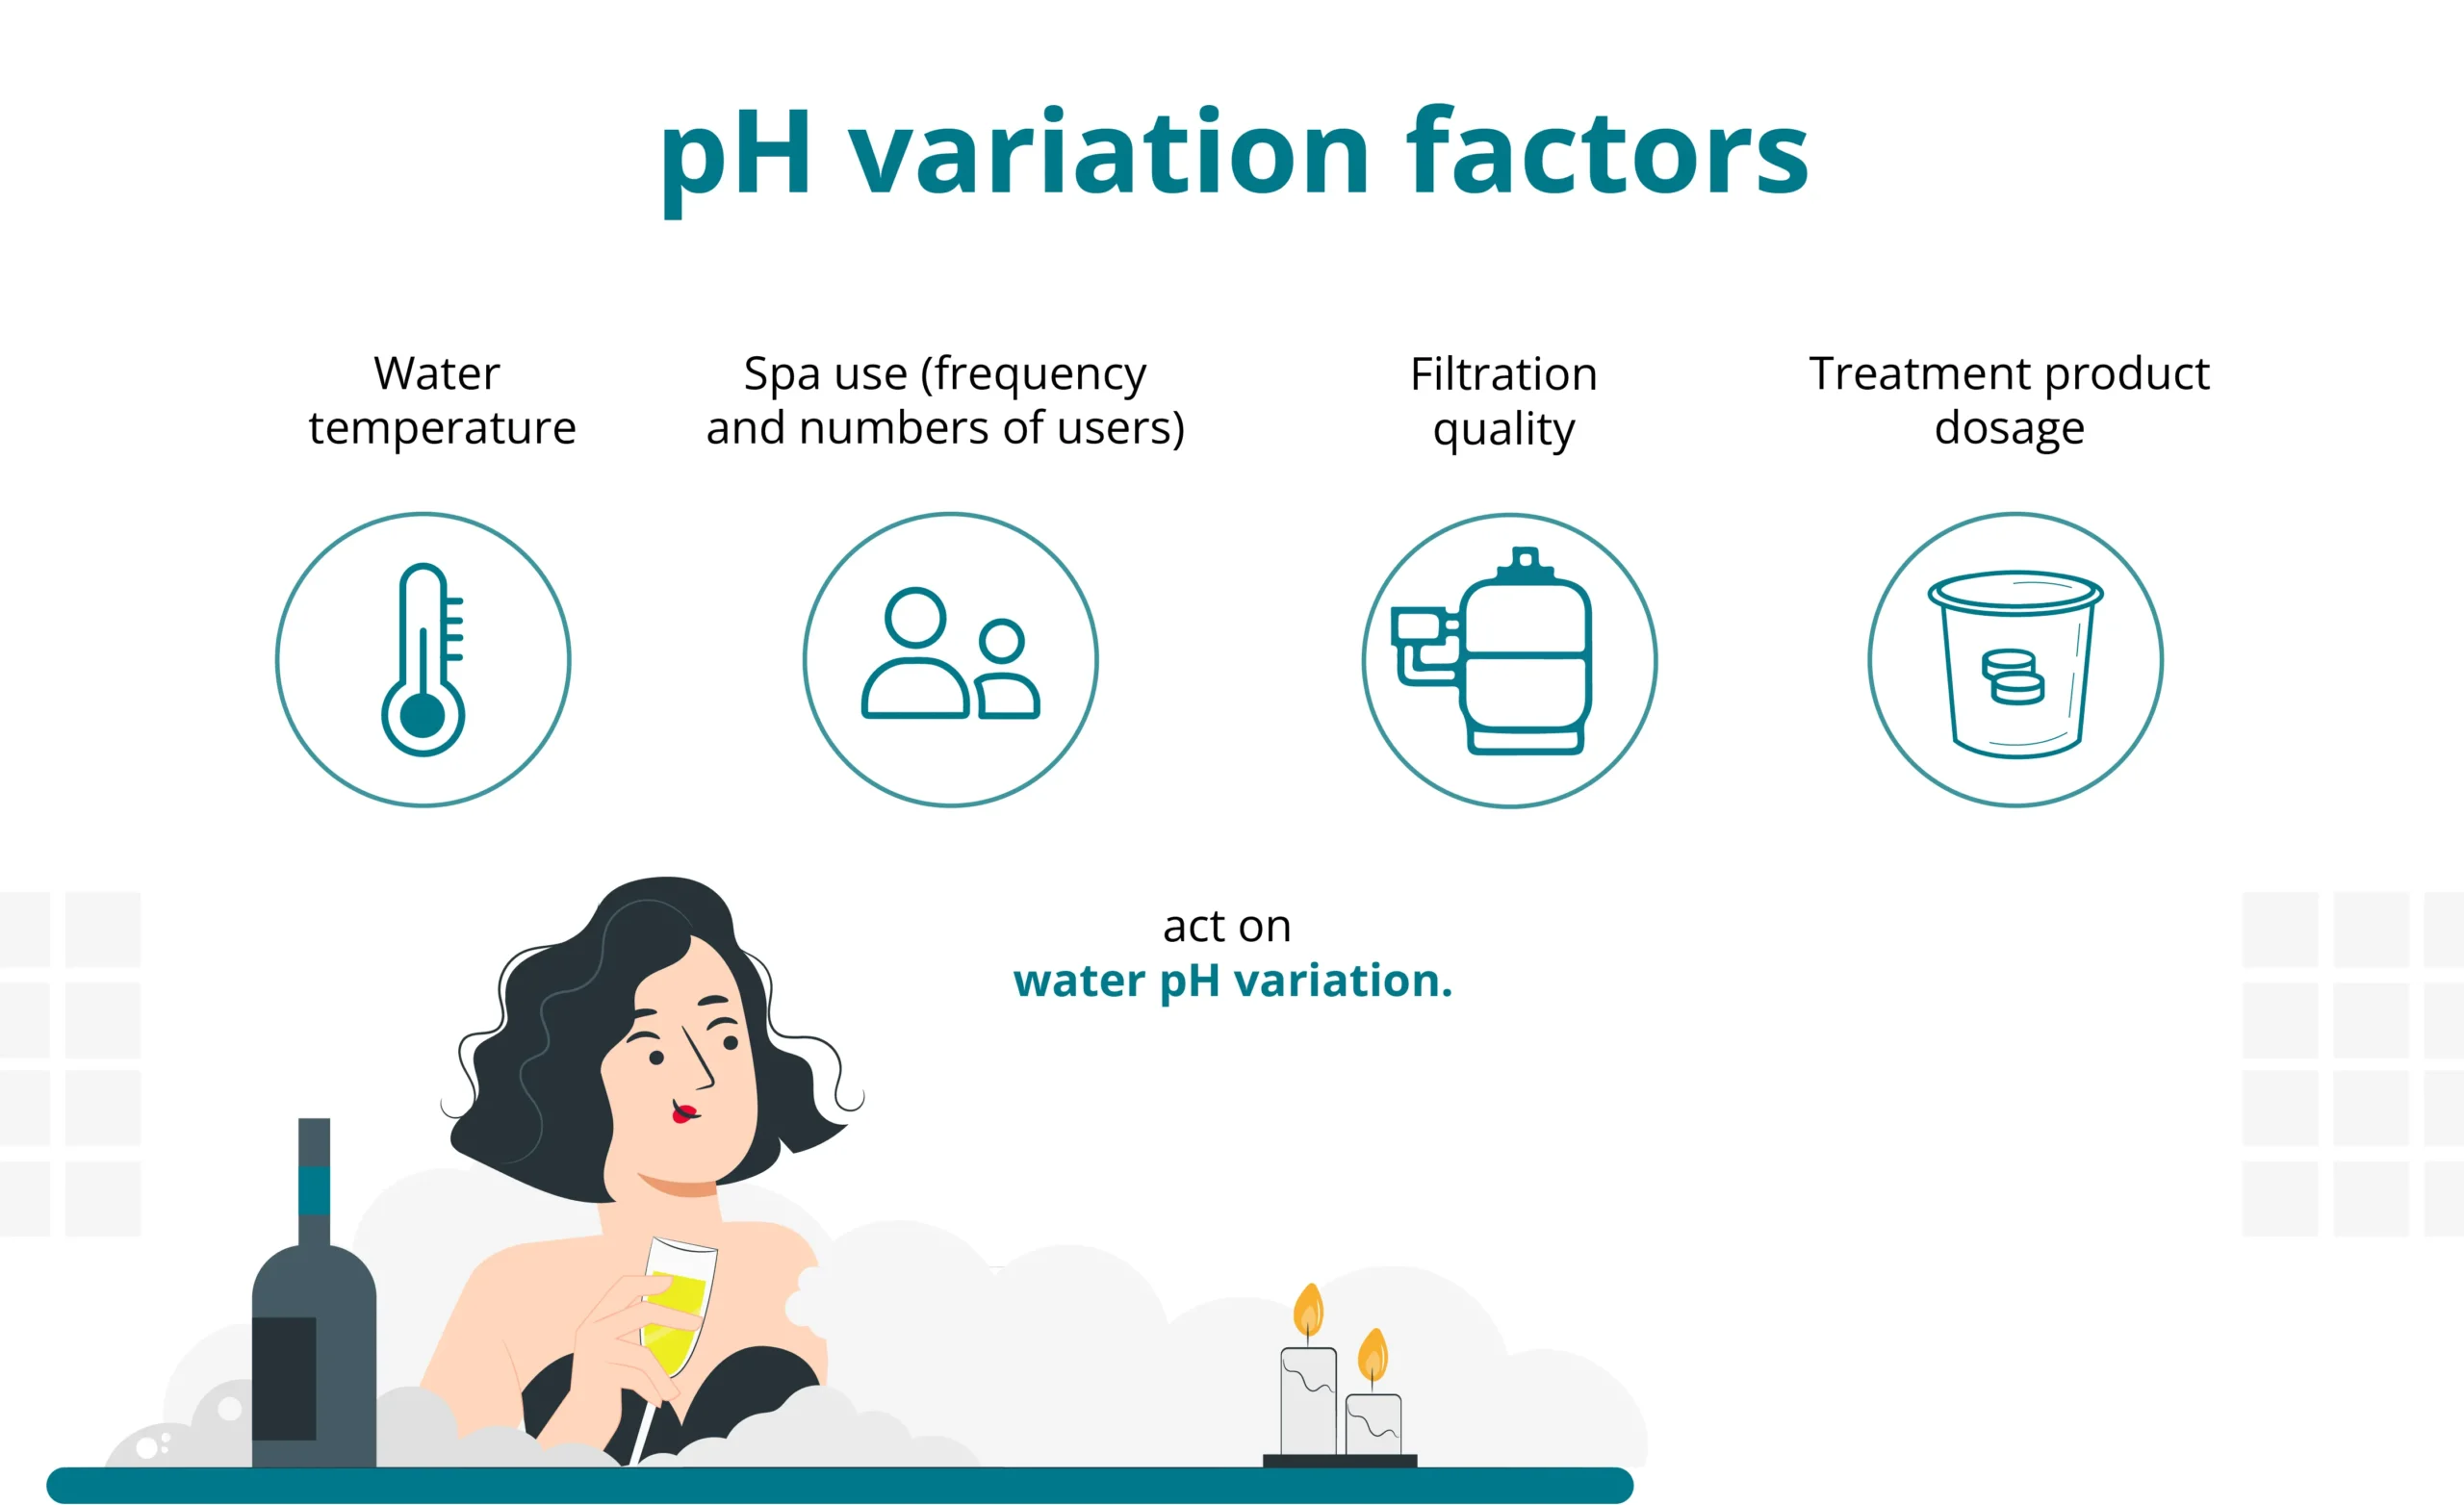 Factors influencing pH variations: water temperature, bathers, filtration and chemical treatment.